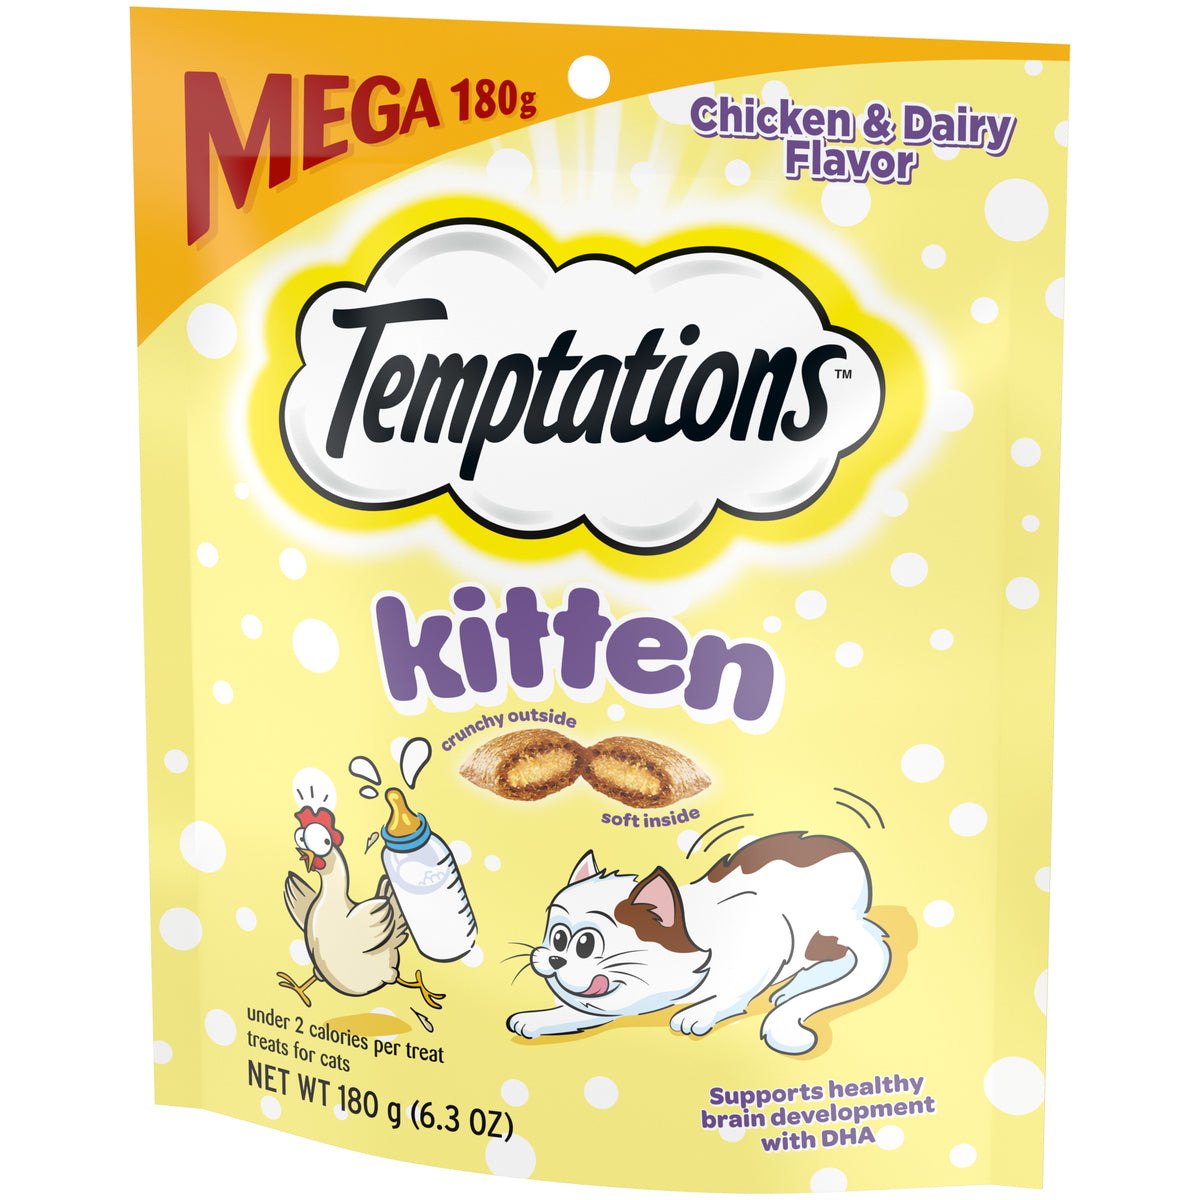 [Temptations][BUNDLE TEMPTATIONS Crunchy and Soft Kitten Treats, Chicken and Dairy Flavor, 6.3 oz. Pouch][Image Center Right (3/4 Angle)]